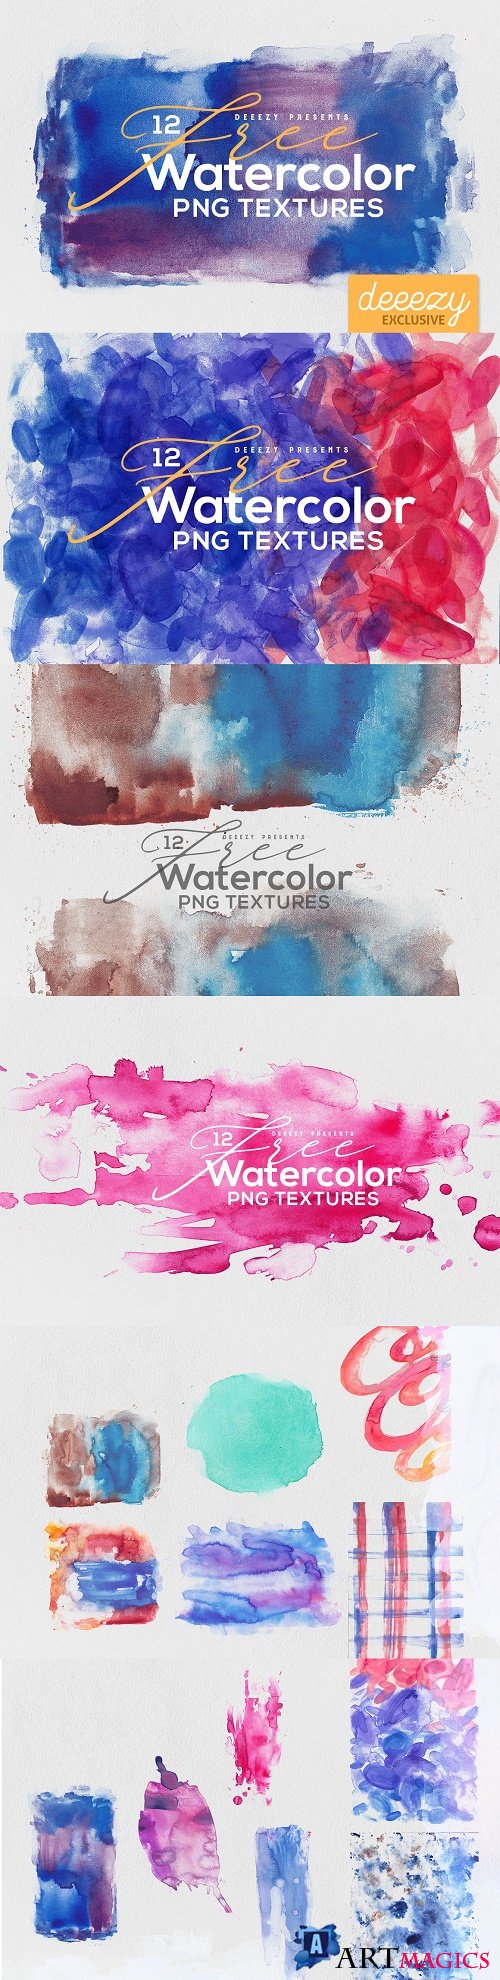 Abstract Watercolor Textures